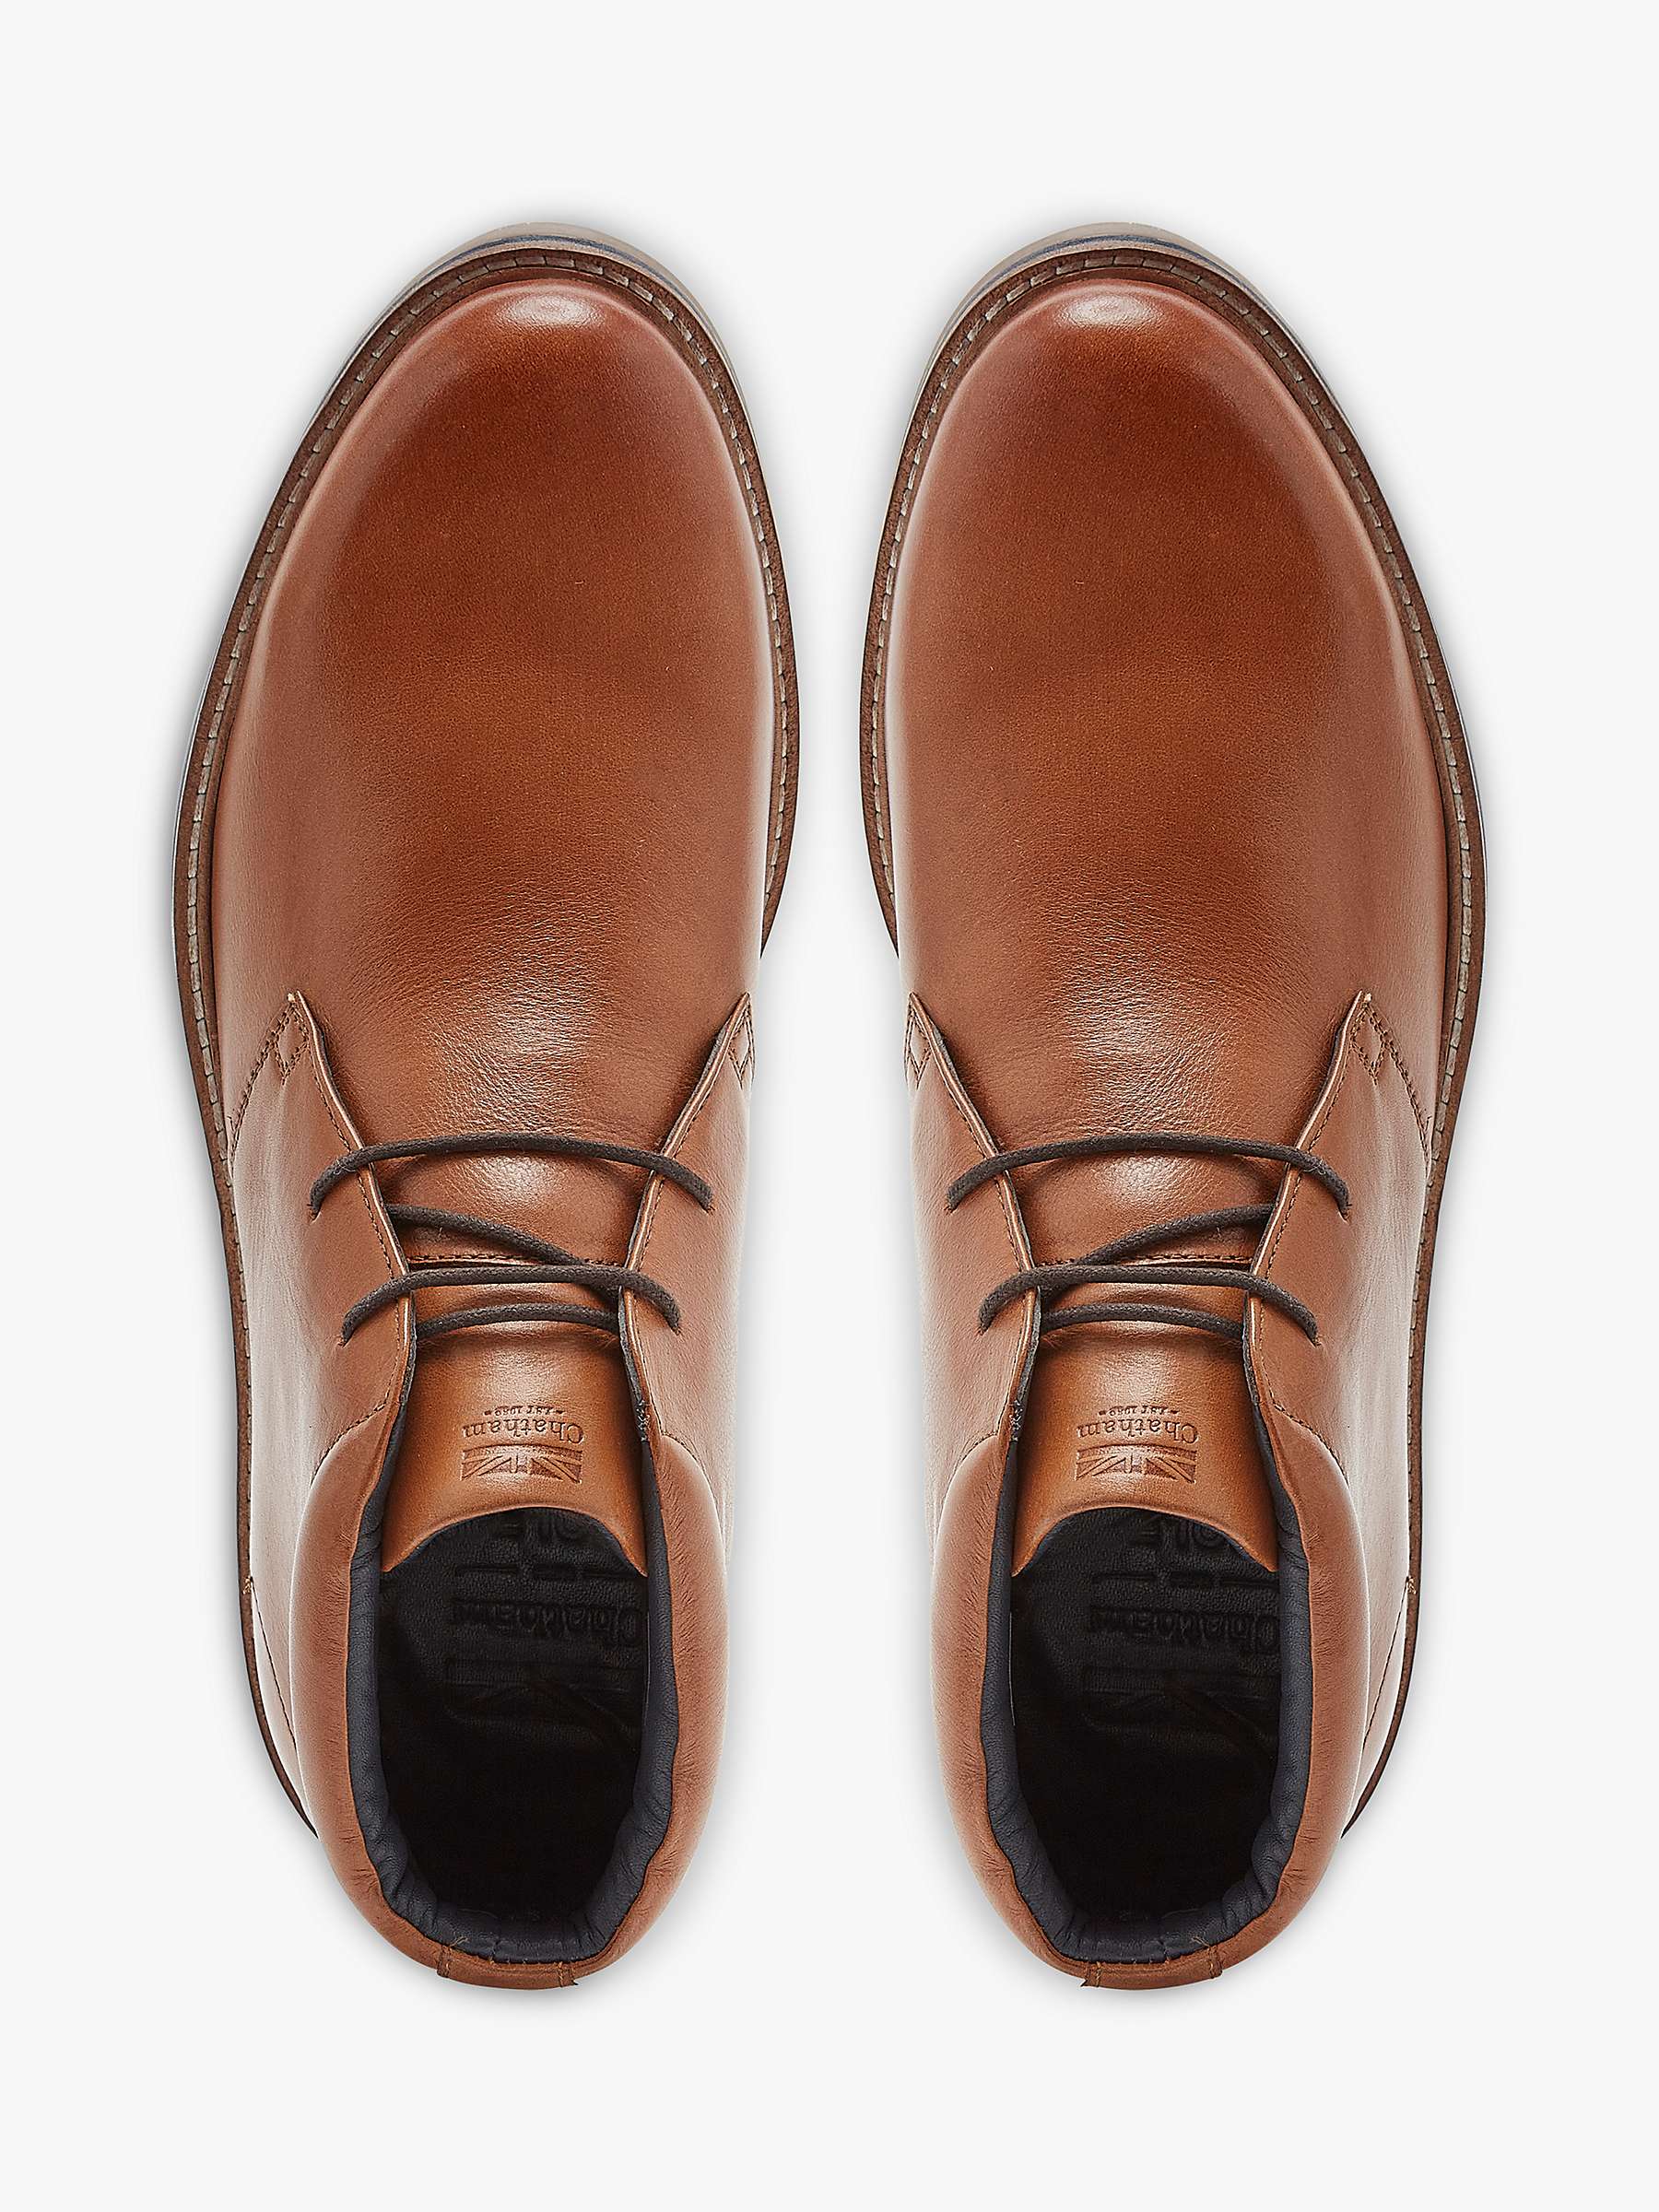 Buy Chatham Buckland Leather Chukka Boots Online at johnlewis.com